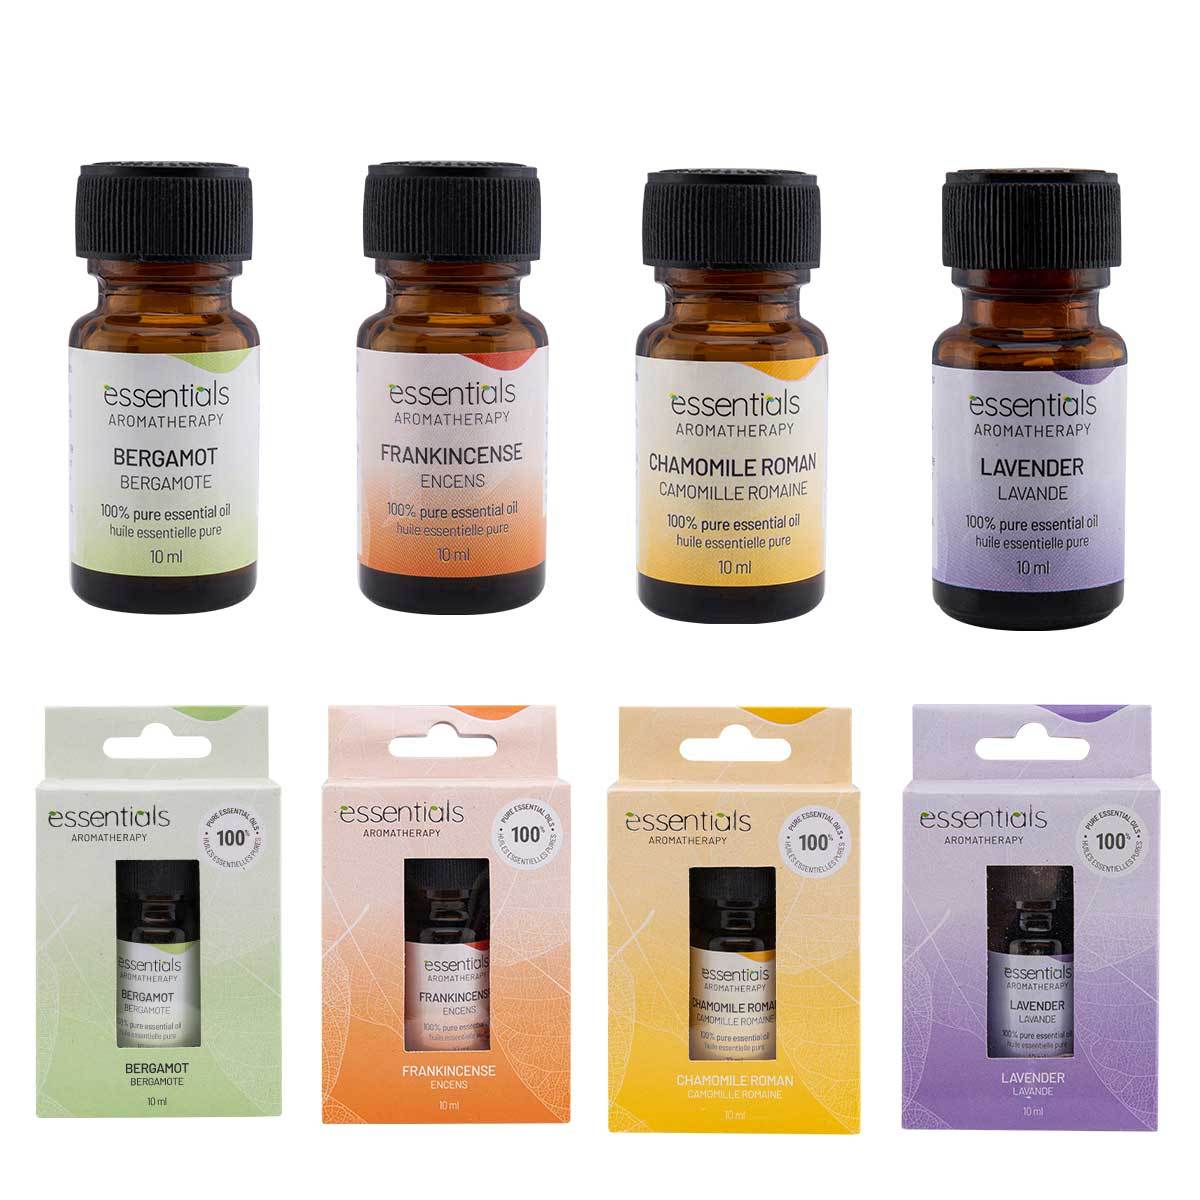 Essential Oils Chattanooga